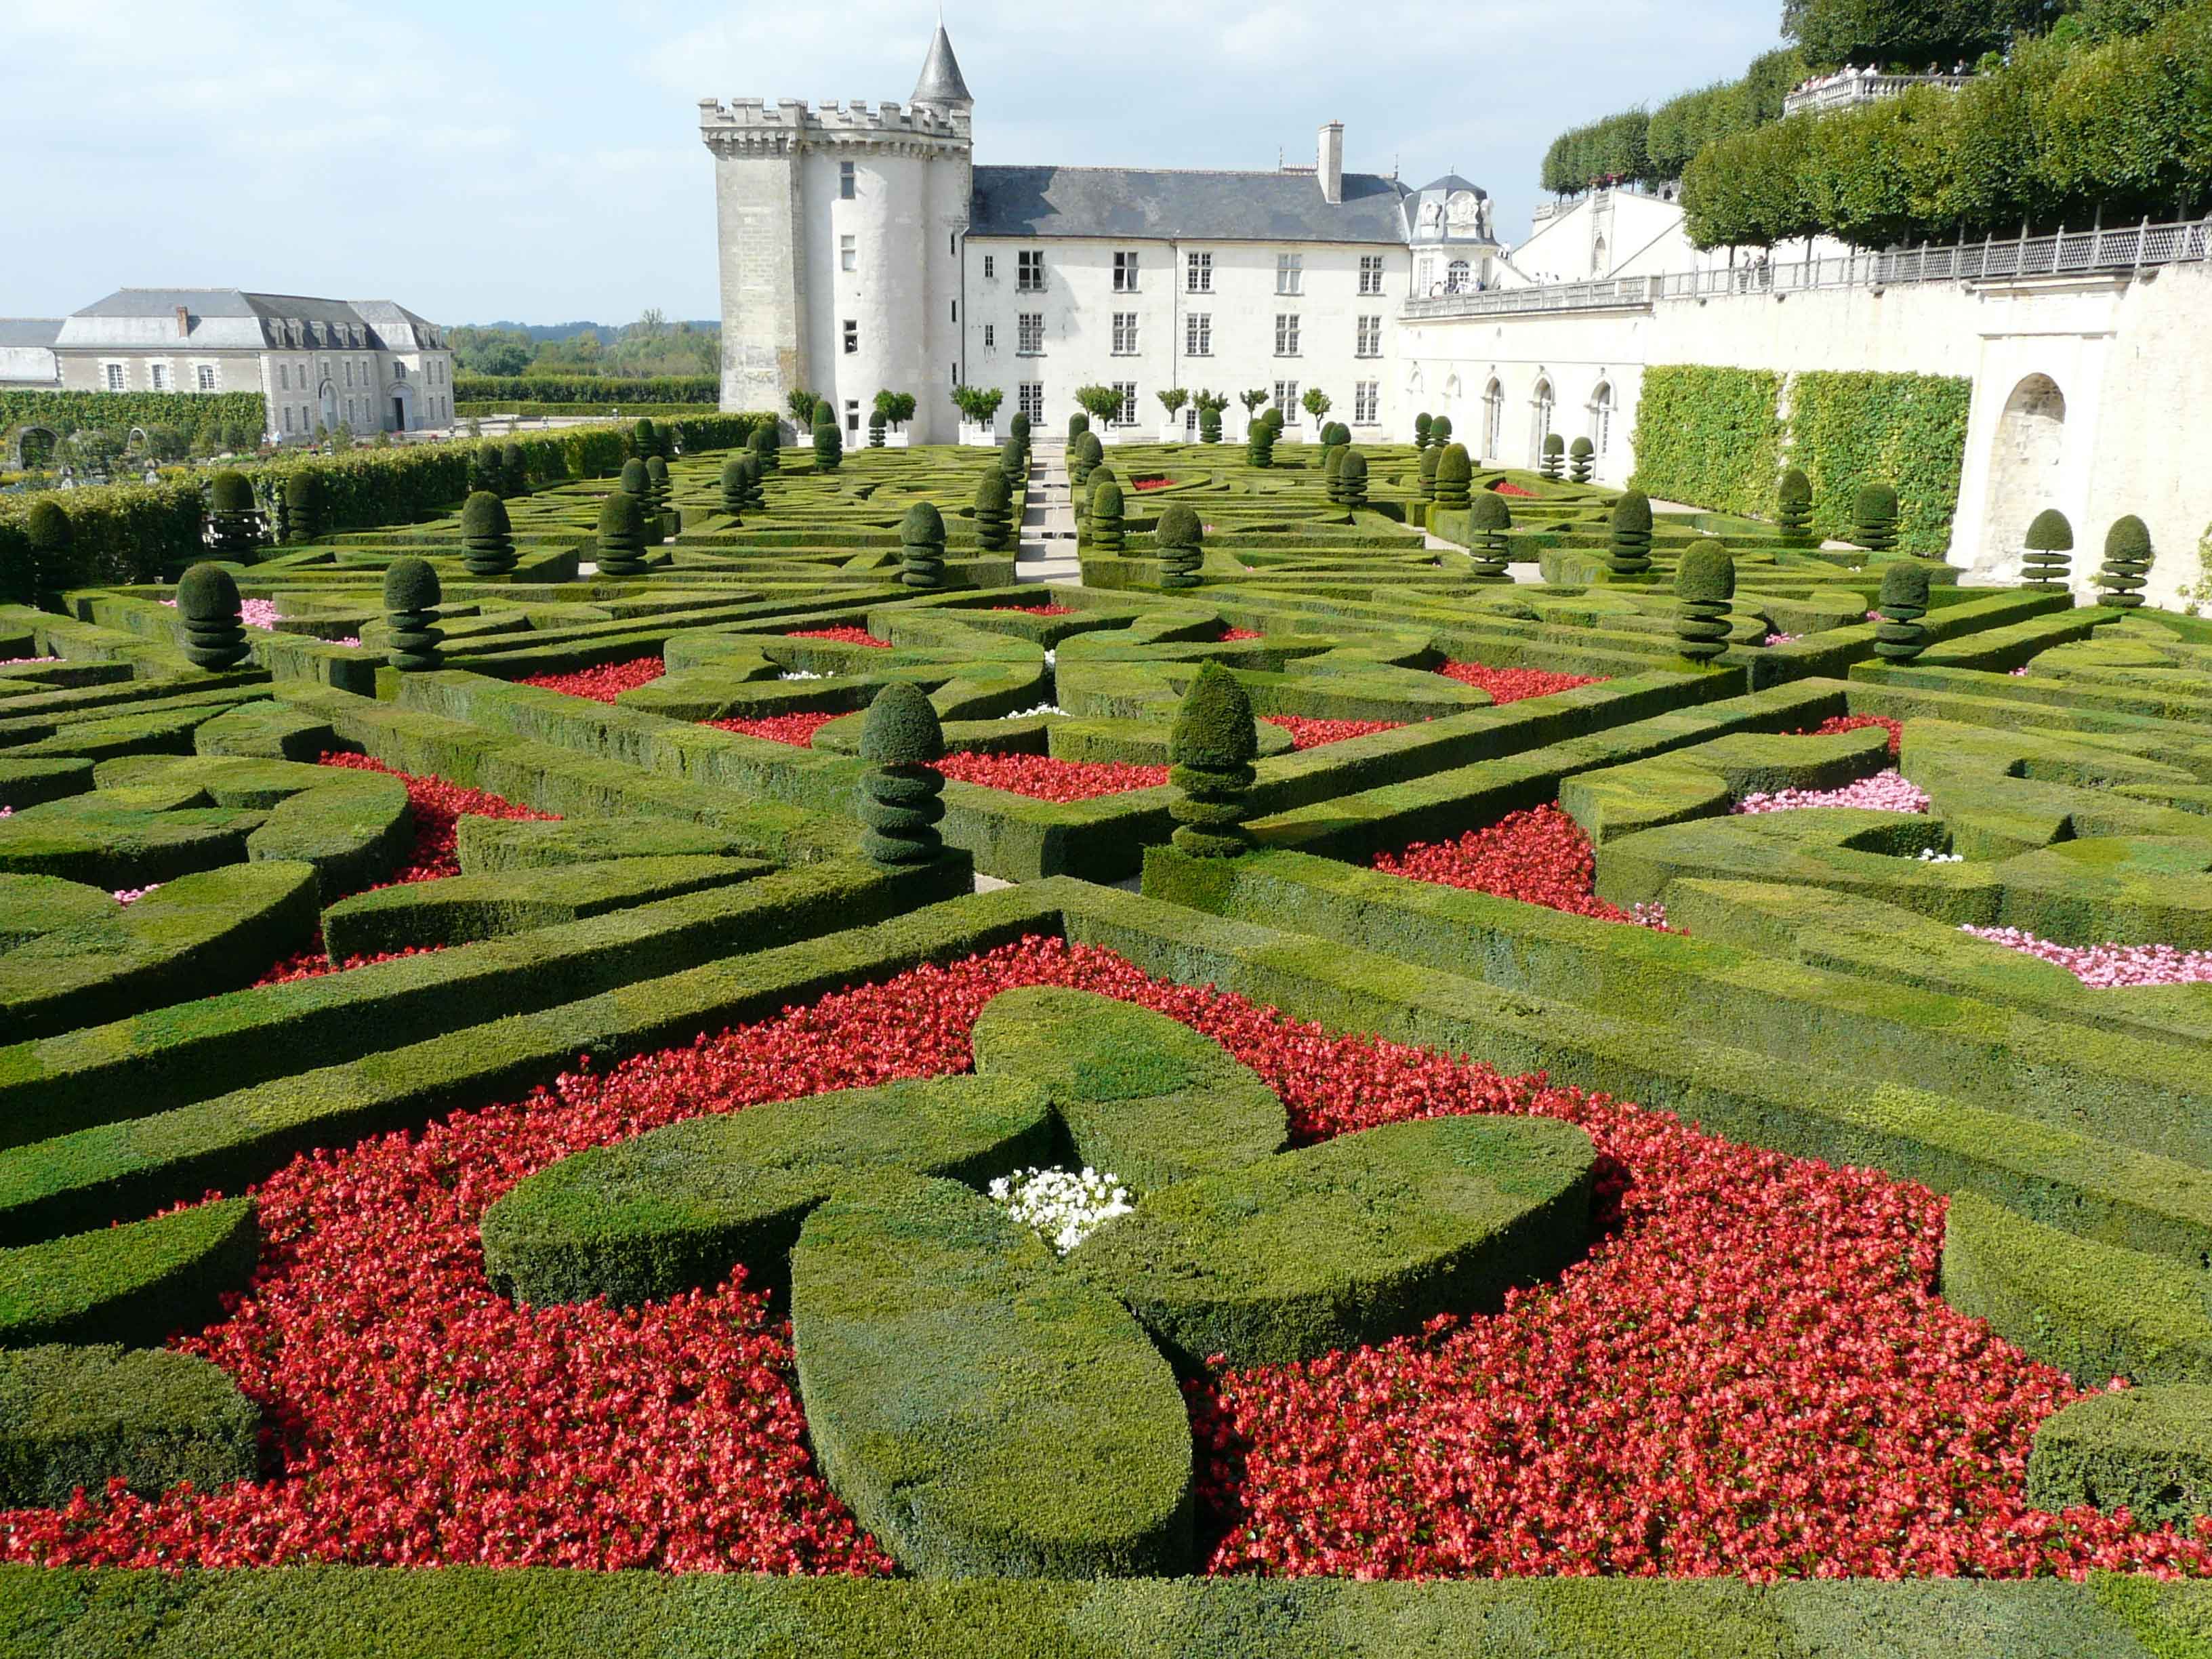 The gardens outside the Chateau de Villandry in the Loire Valley